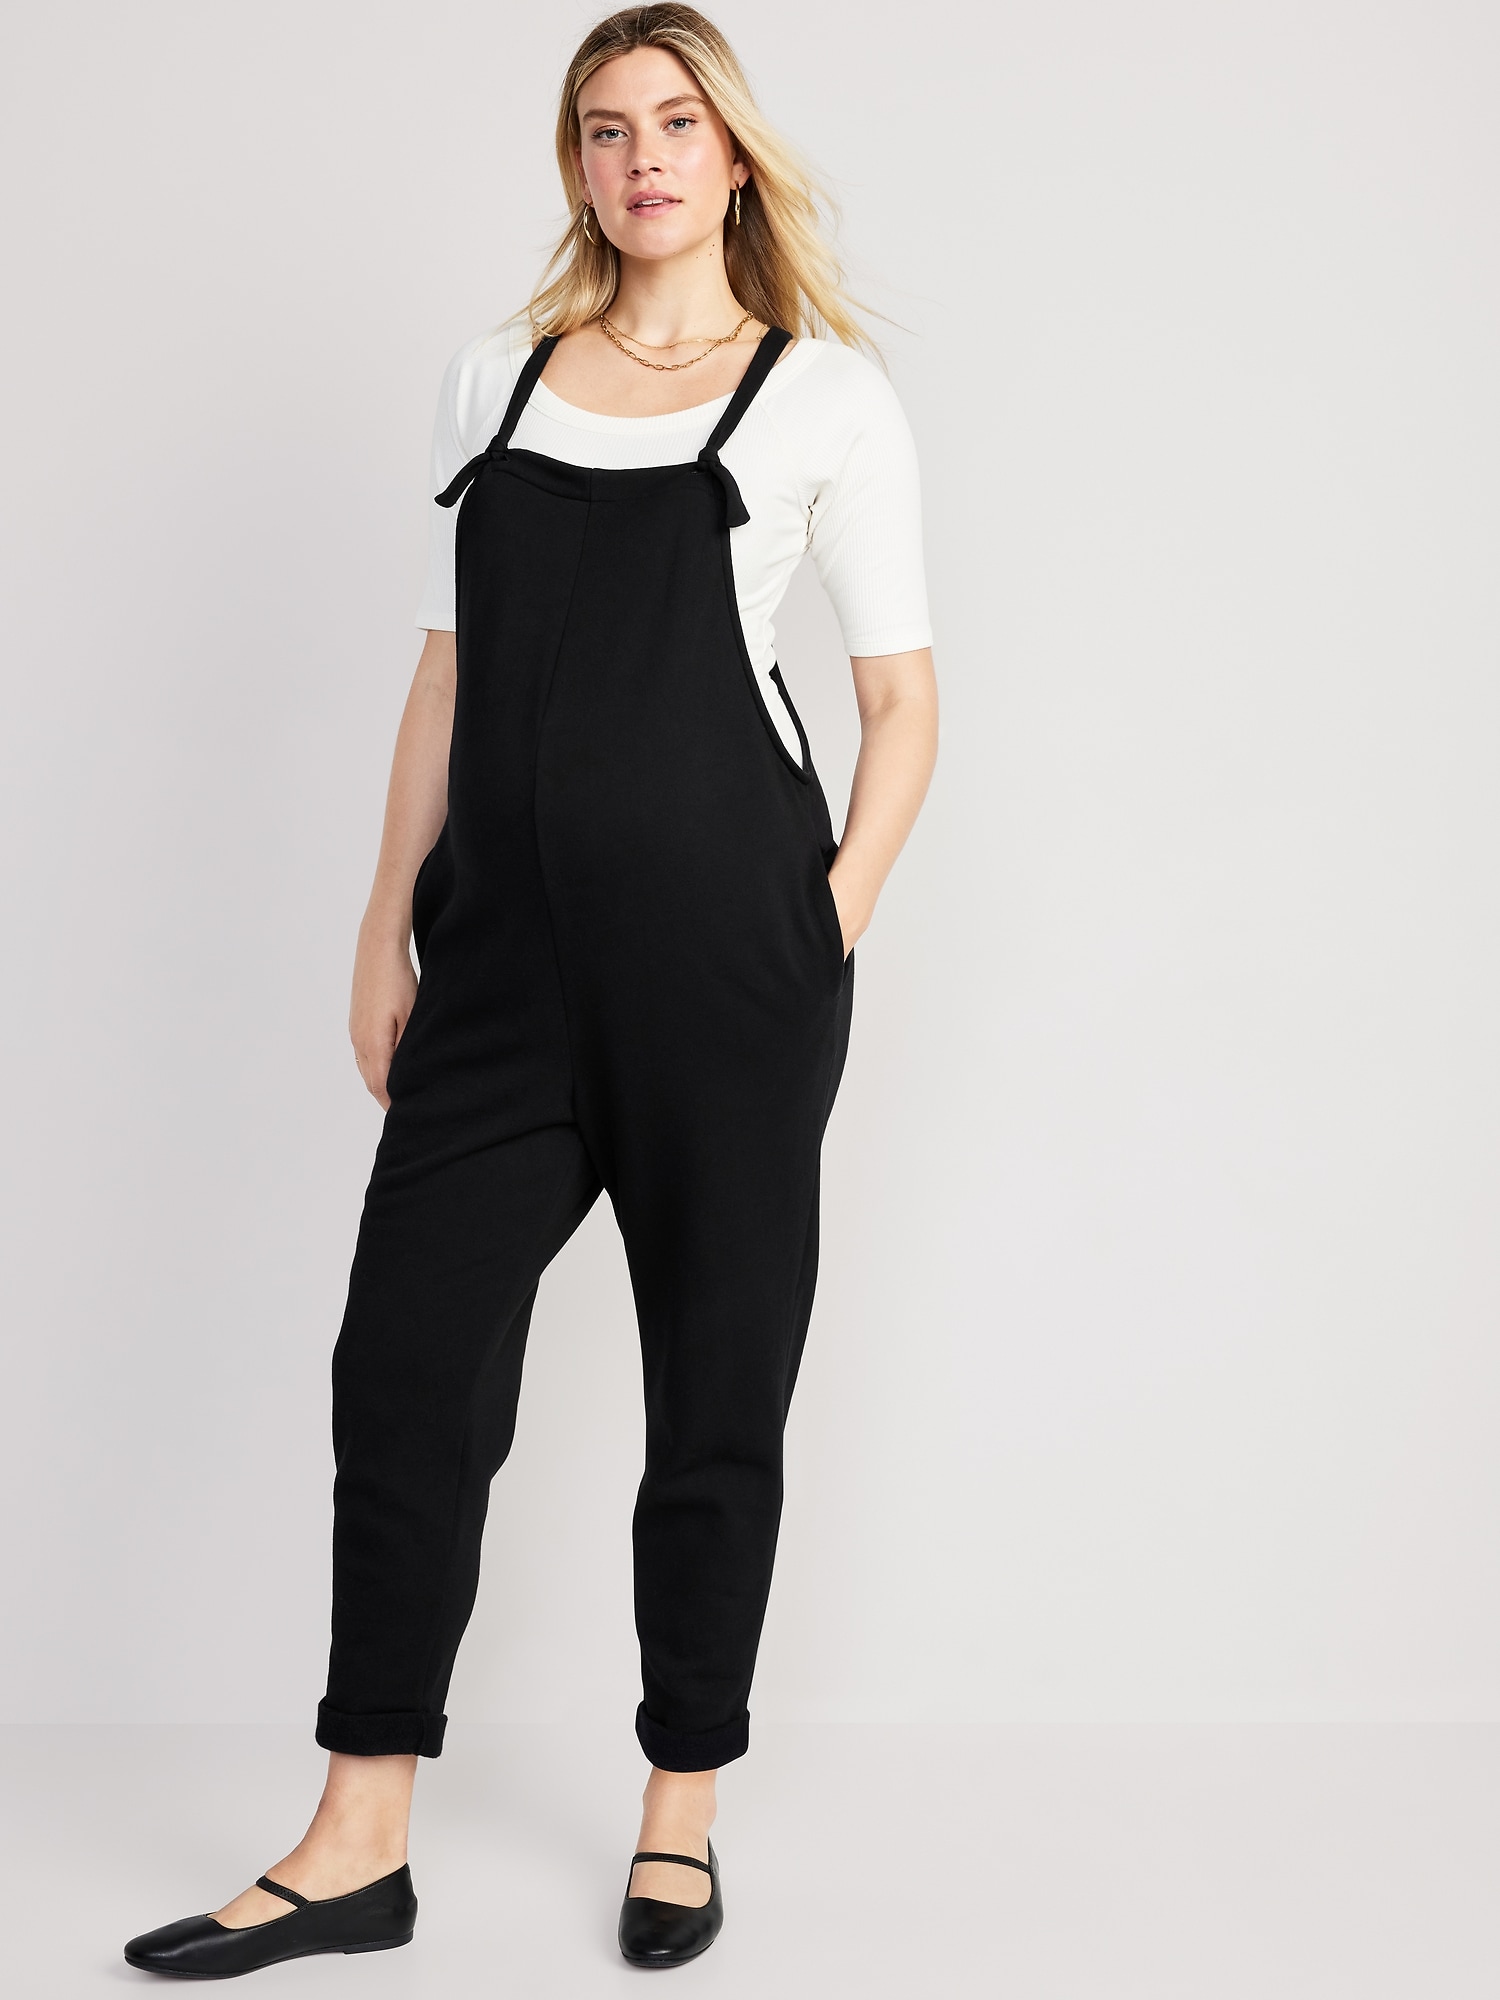 Maternity Knotted-Strap Fleece Overalls | Old Navy